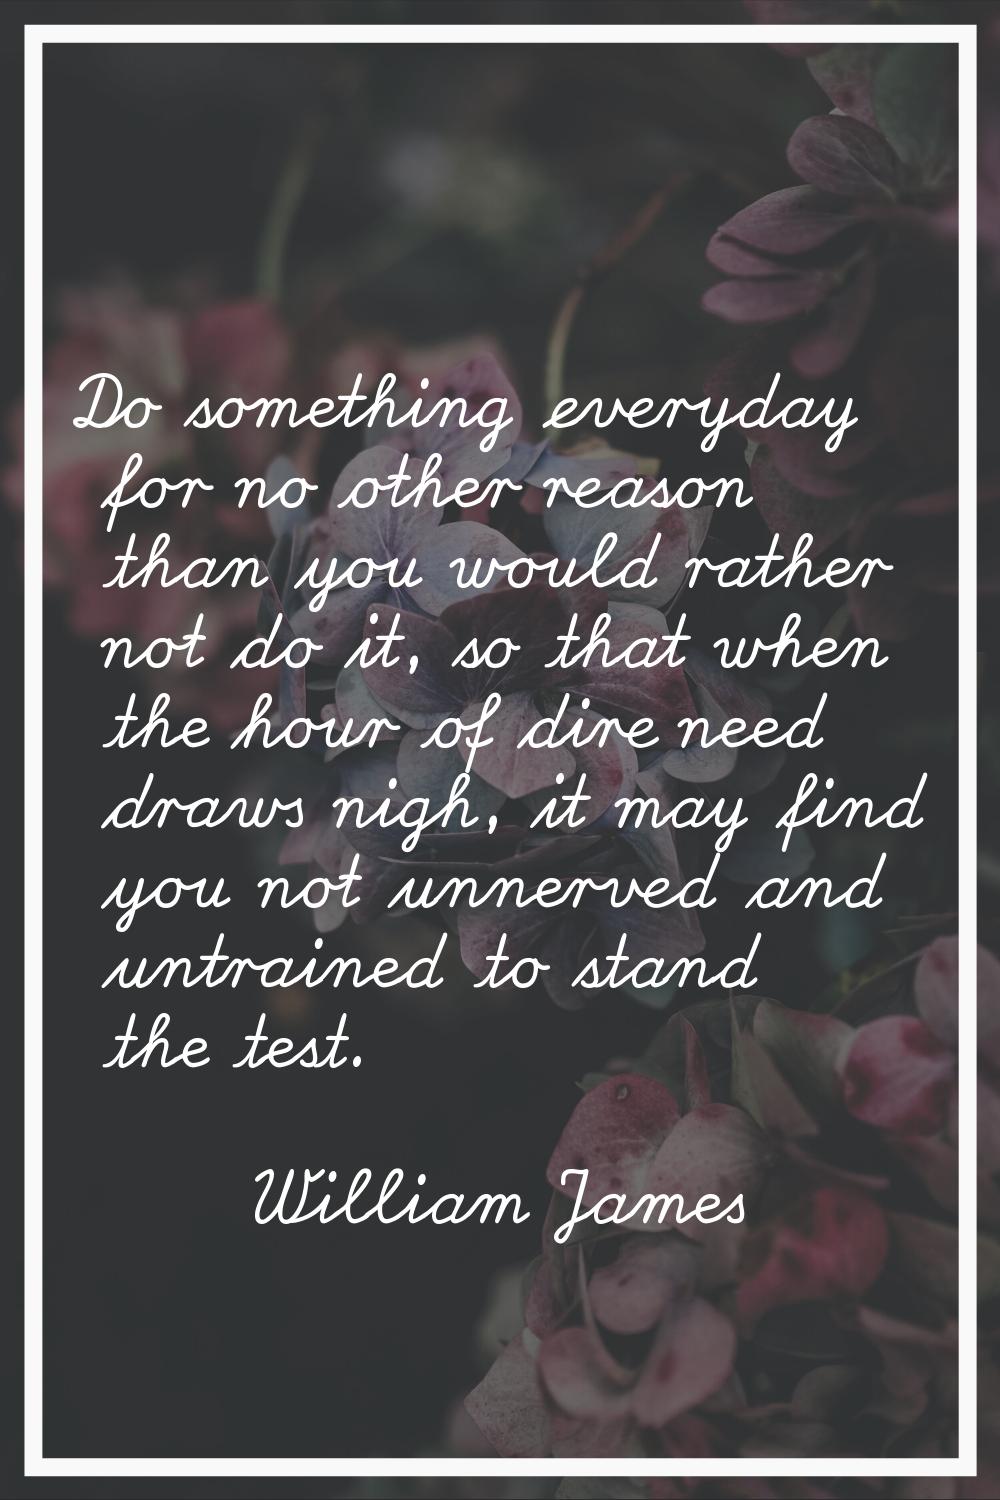 Do something everyday for no other reason than you would rather not do it, so that when the hour of